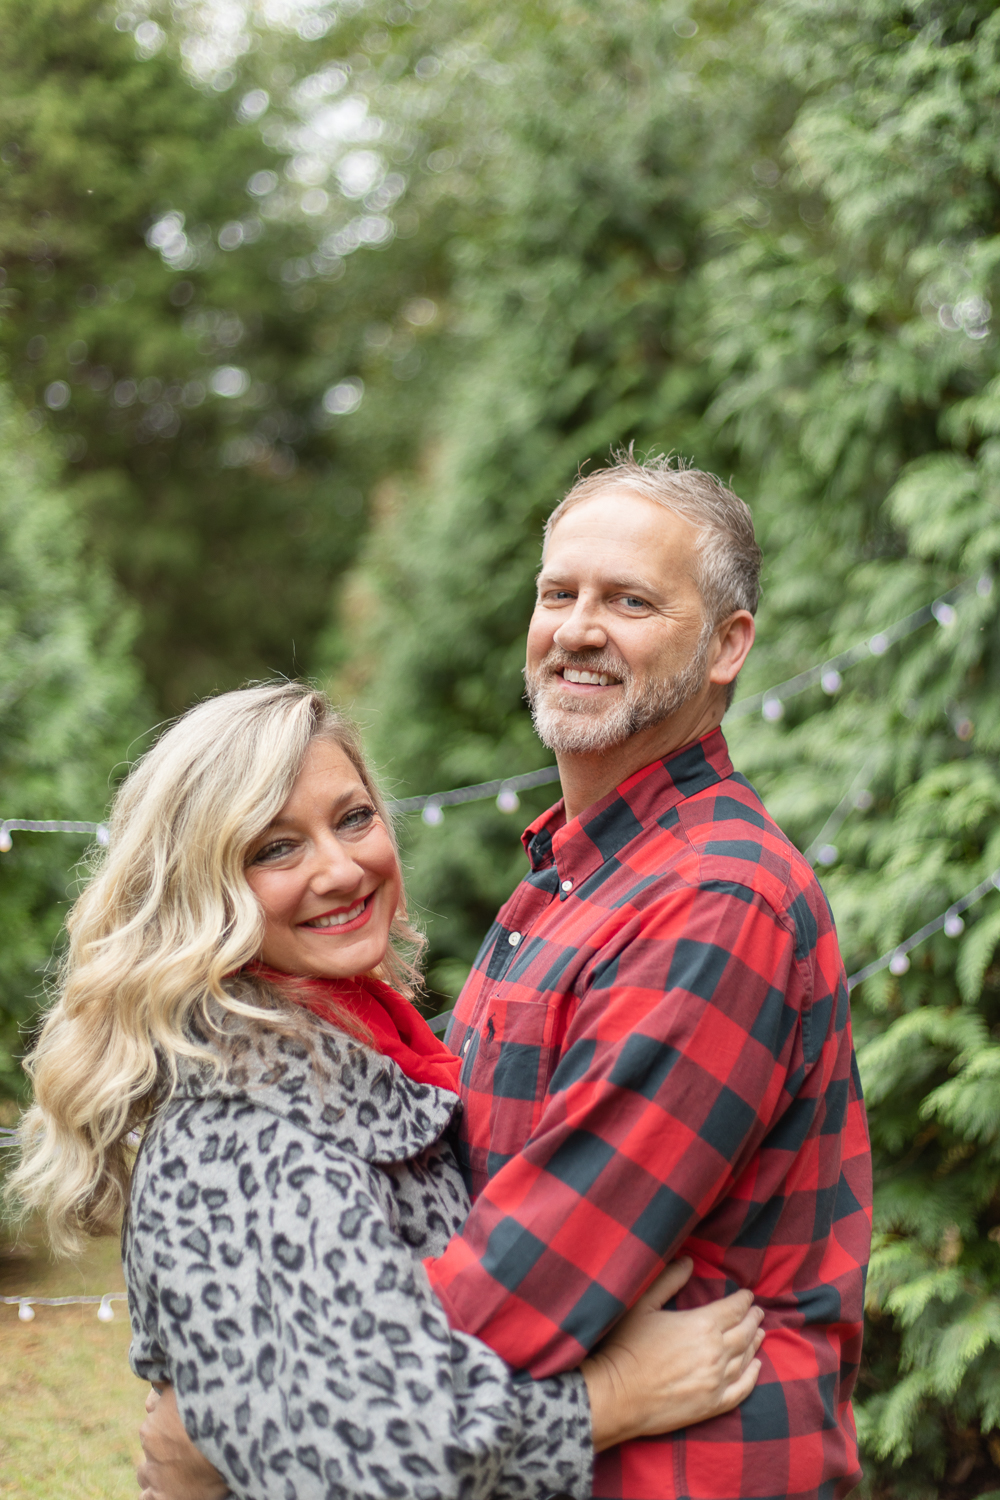 Couples Christmas Photo Session at private farm in Gurley, Alabama by Jade Alexandria Photography. Huntsville, Alabama portrait photographer.